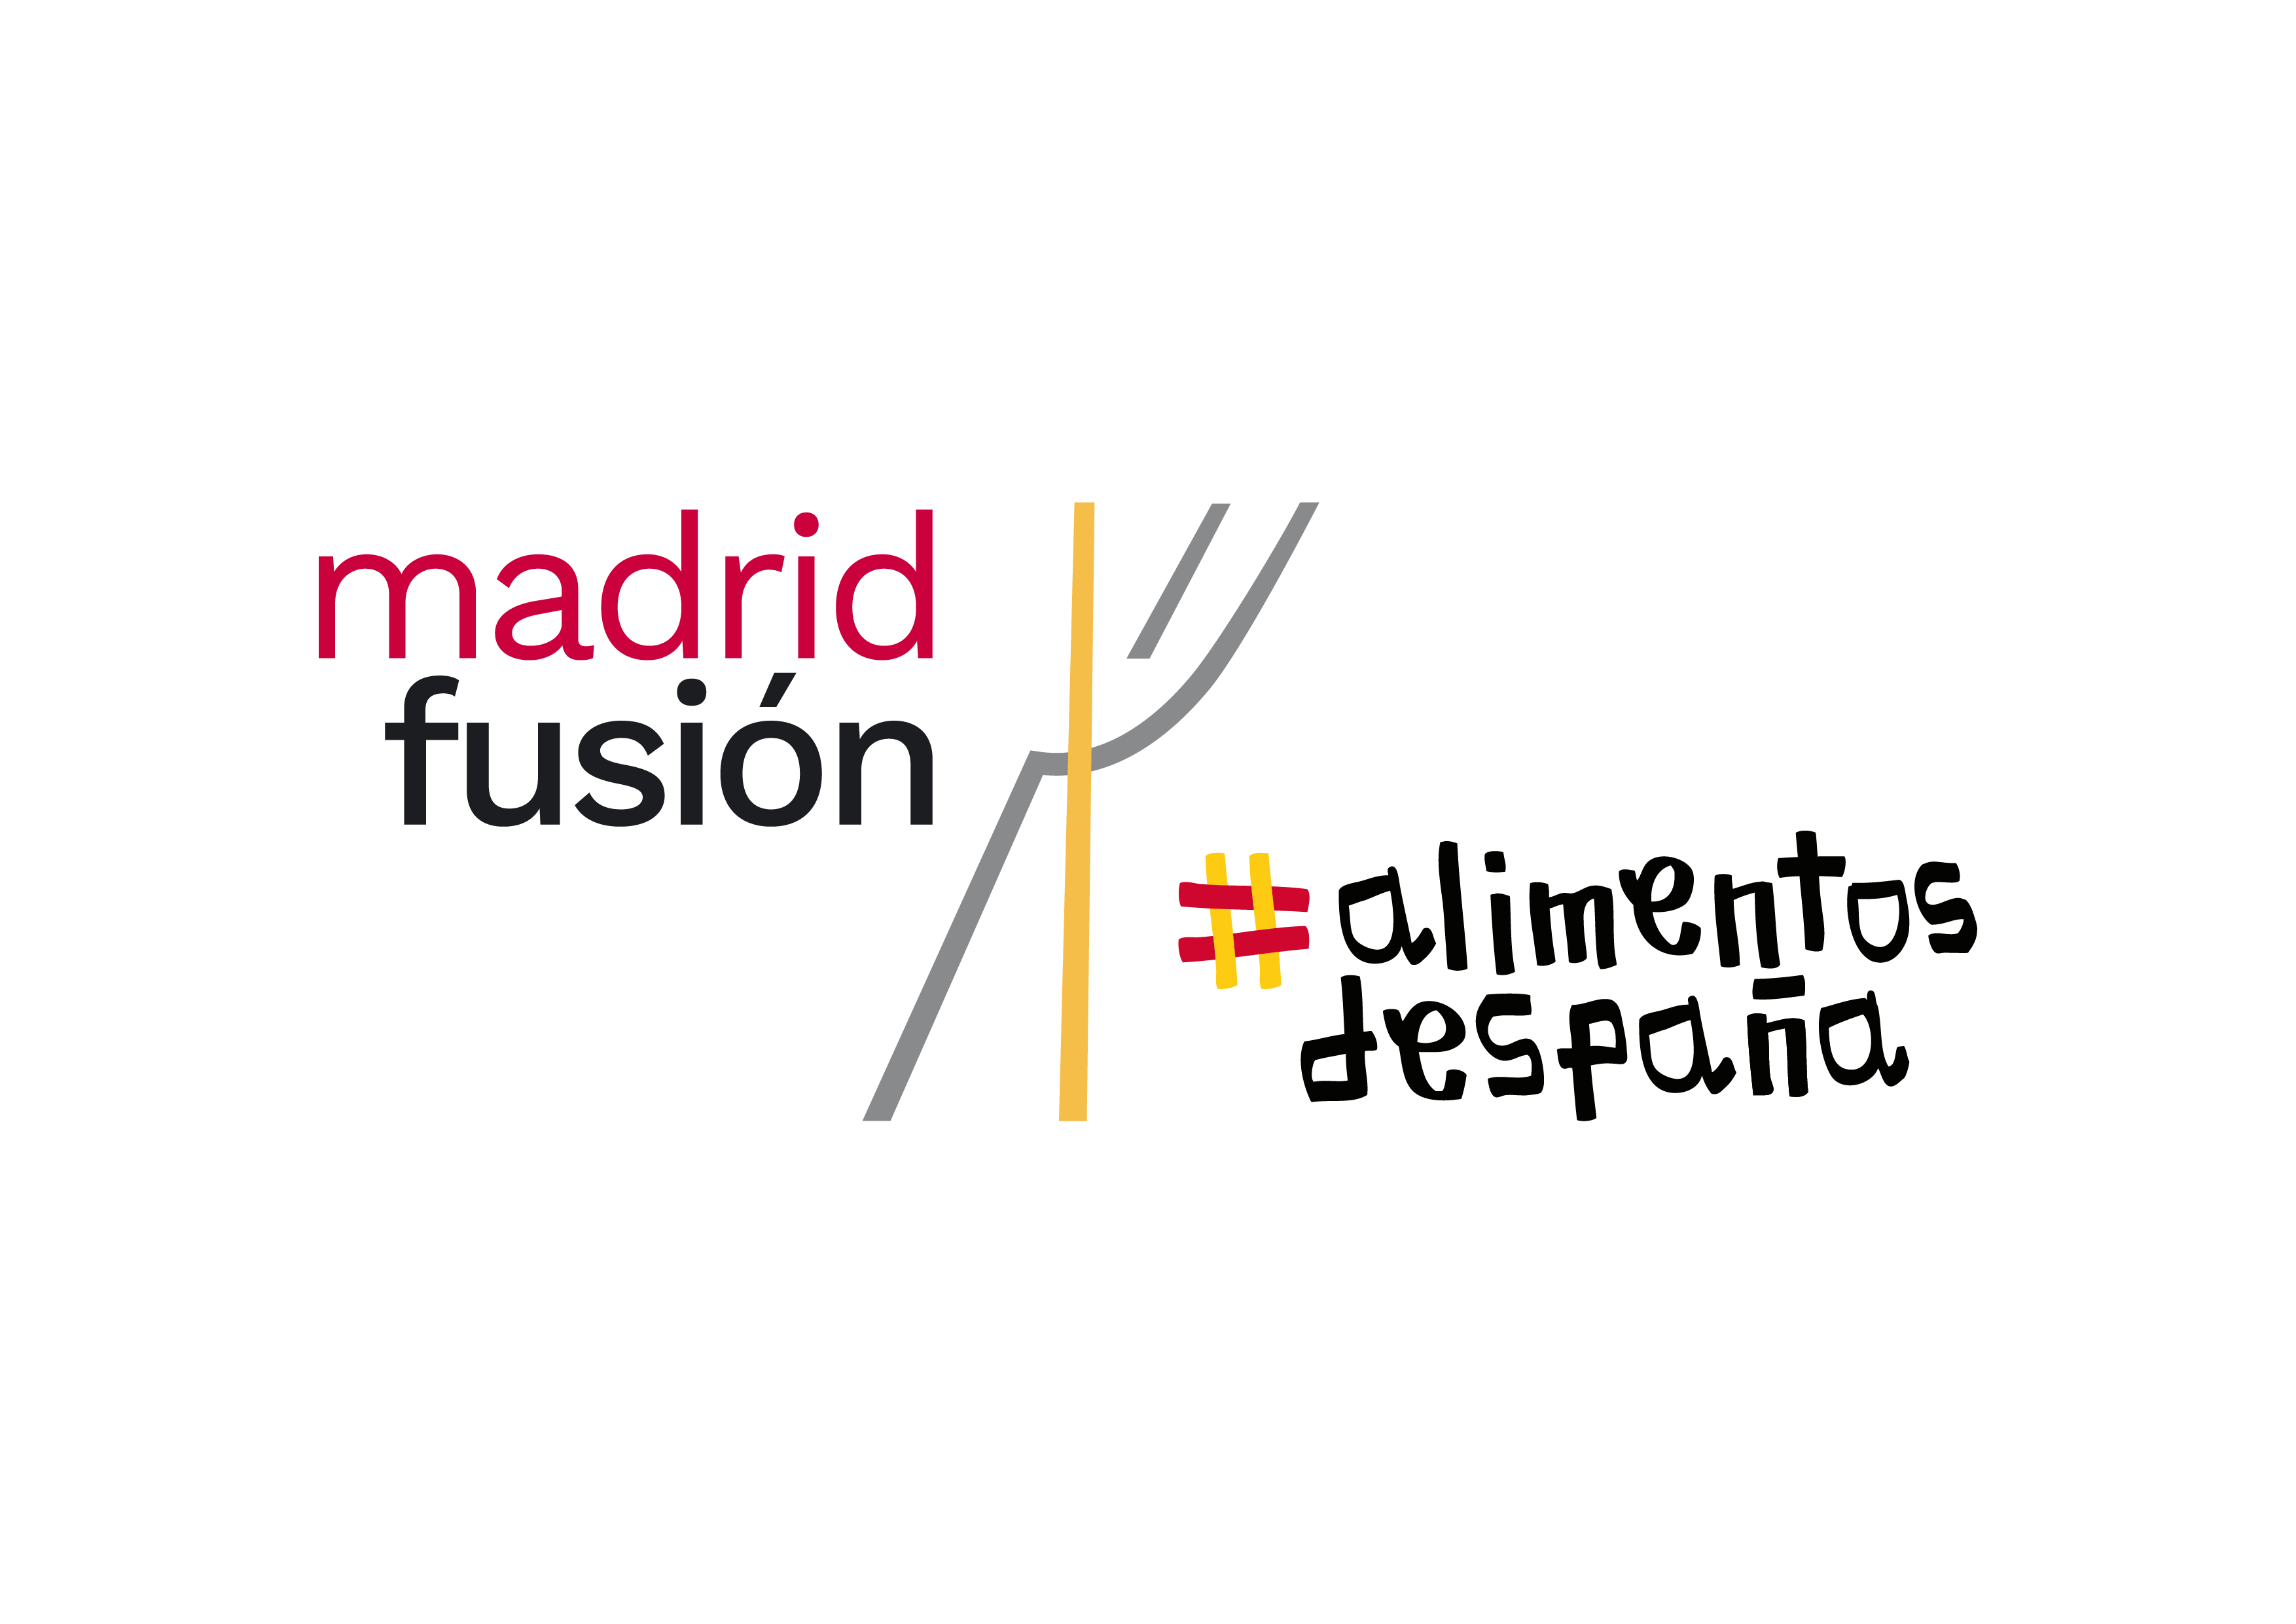 Image 32 of MADRID FUSION LOGO 2021 ALIM ENTOS DE ESPAÑA CMYK 01 in Silestone® awards the “Chef of the Year” to eight renowned chefs at 2021 Madrid Fusion - Cosentino